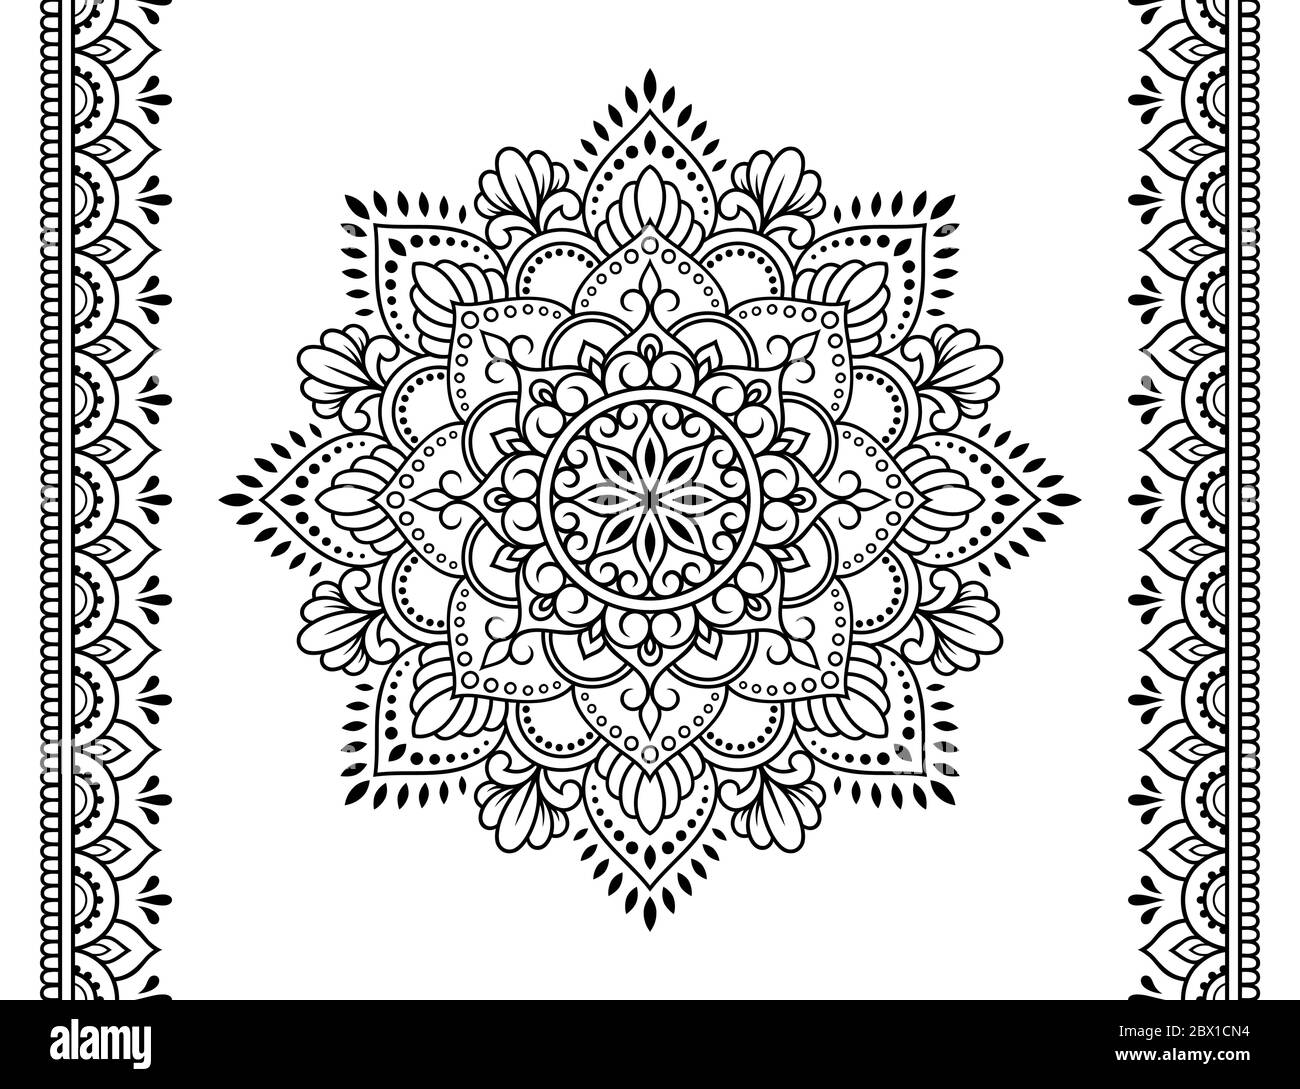 Detailed Drawings with many Styles  Doodle art, Detailed drawings, Mandala  design art